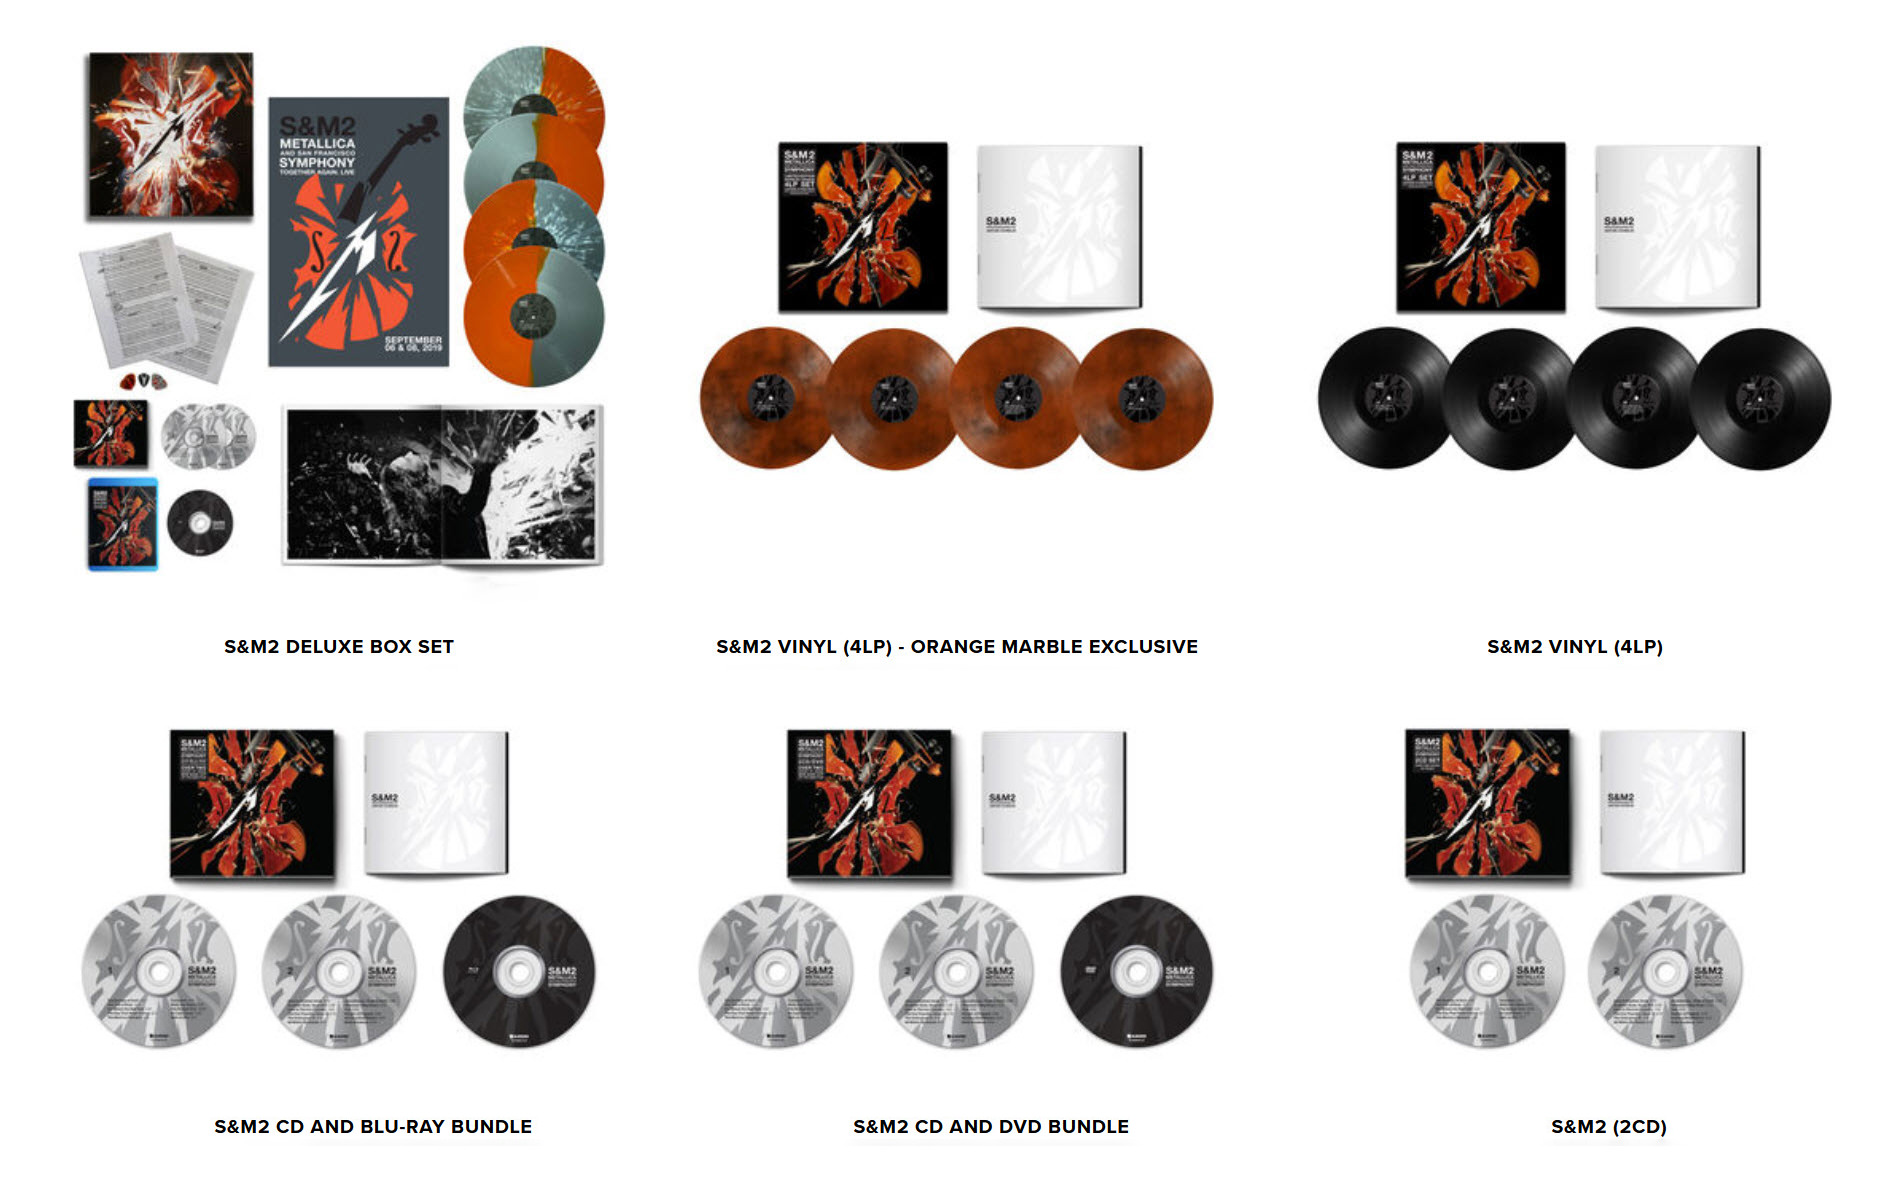 Metallica S S M2 Box Set Featuring 19 Performances With San Francisco Symphony To Arrive August 28